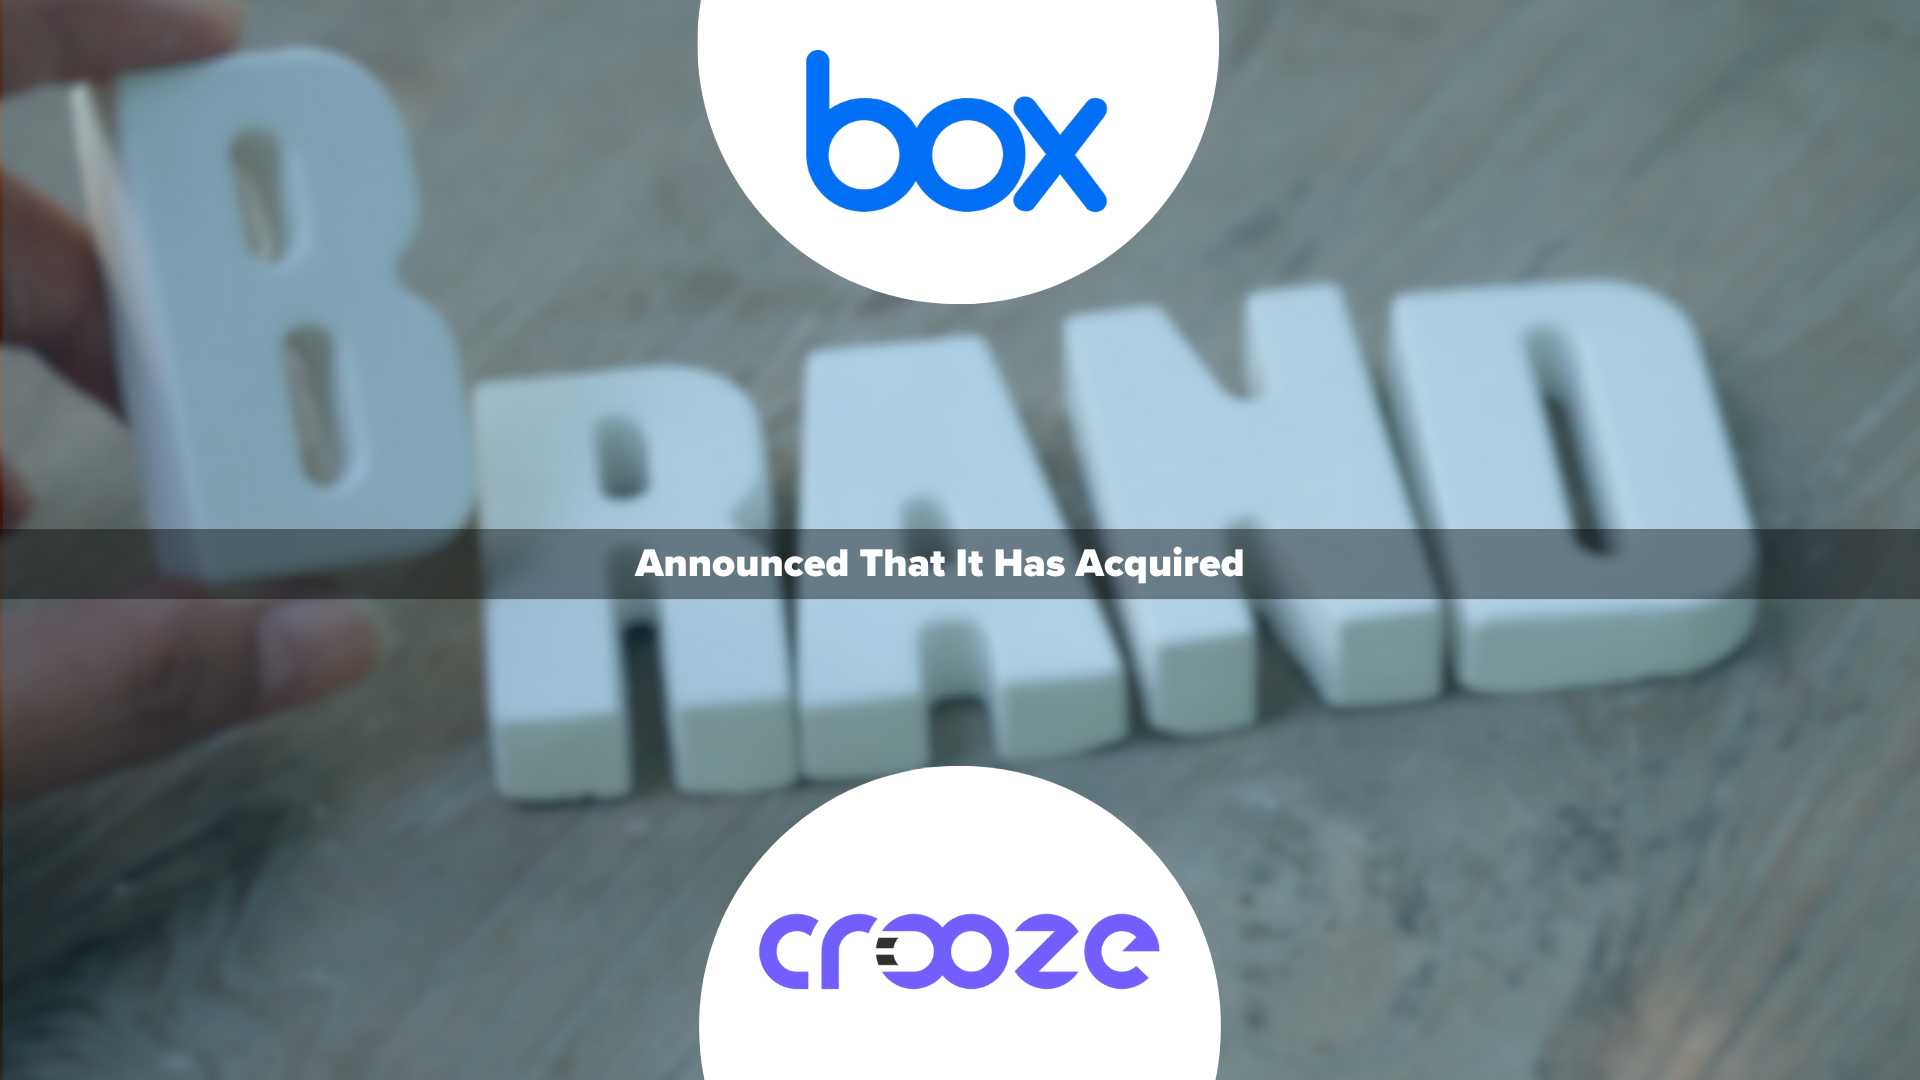 Box Acquires Crooze to Transform Enterprise Content Management with AI and Metadata-Powered Applications